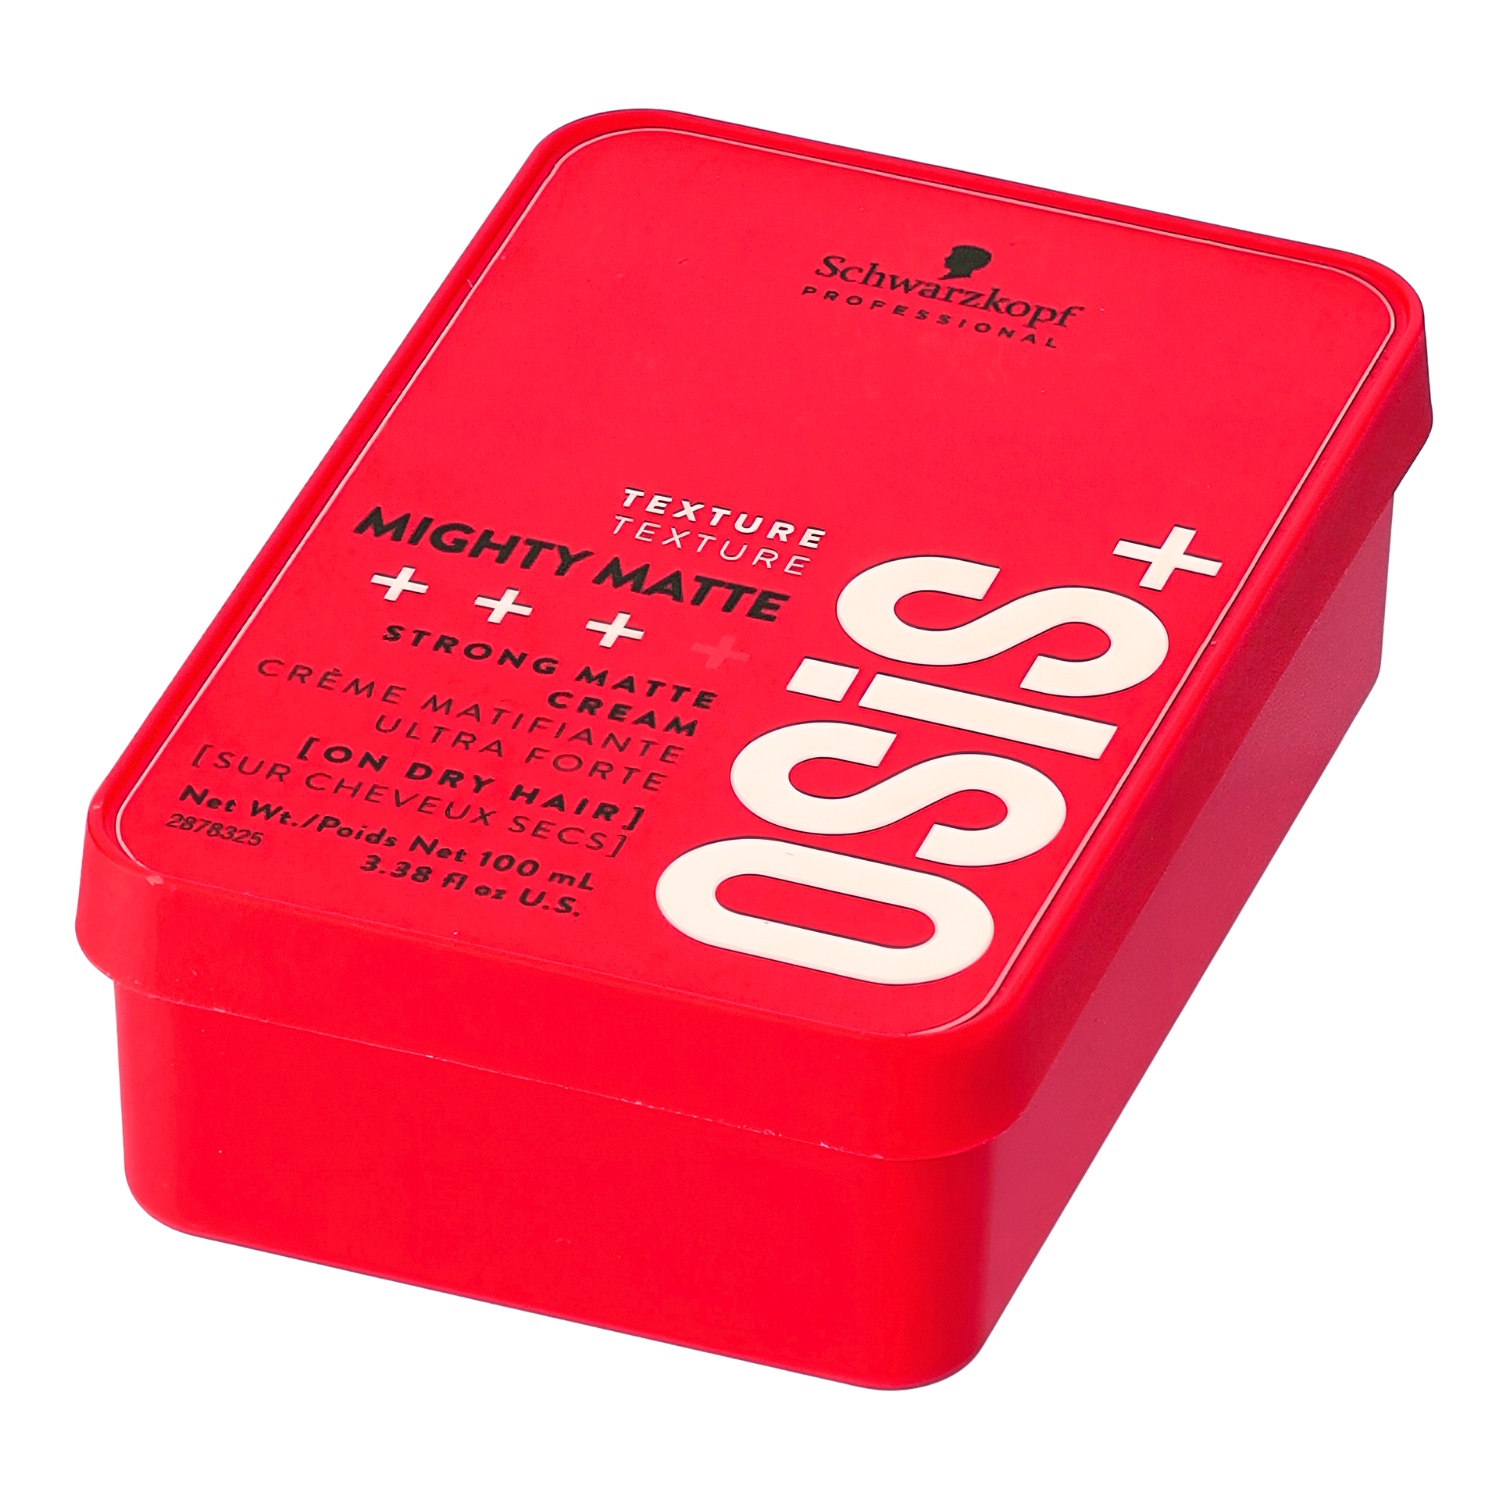 OSIS Mighty Matte Cream